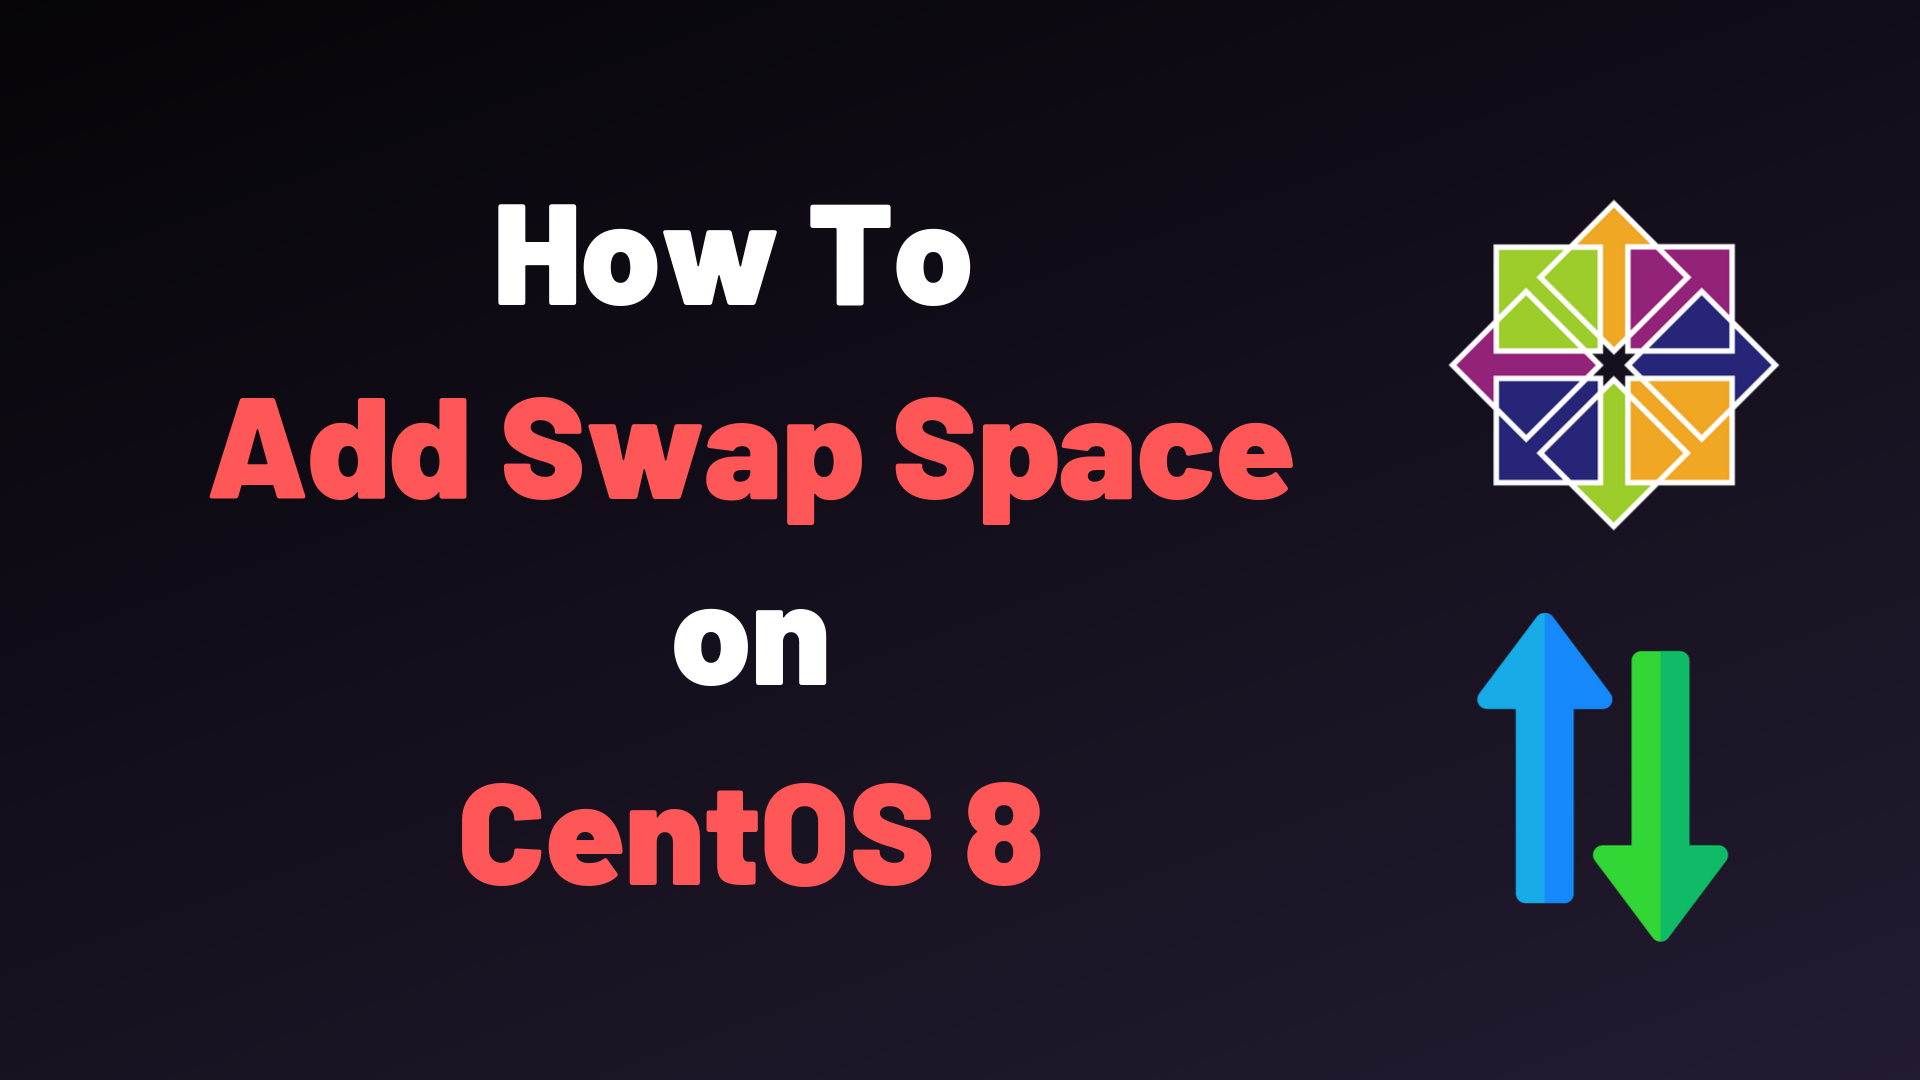 How To Add Swap Space on CentOS 8